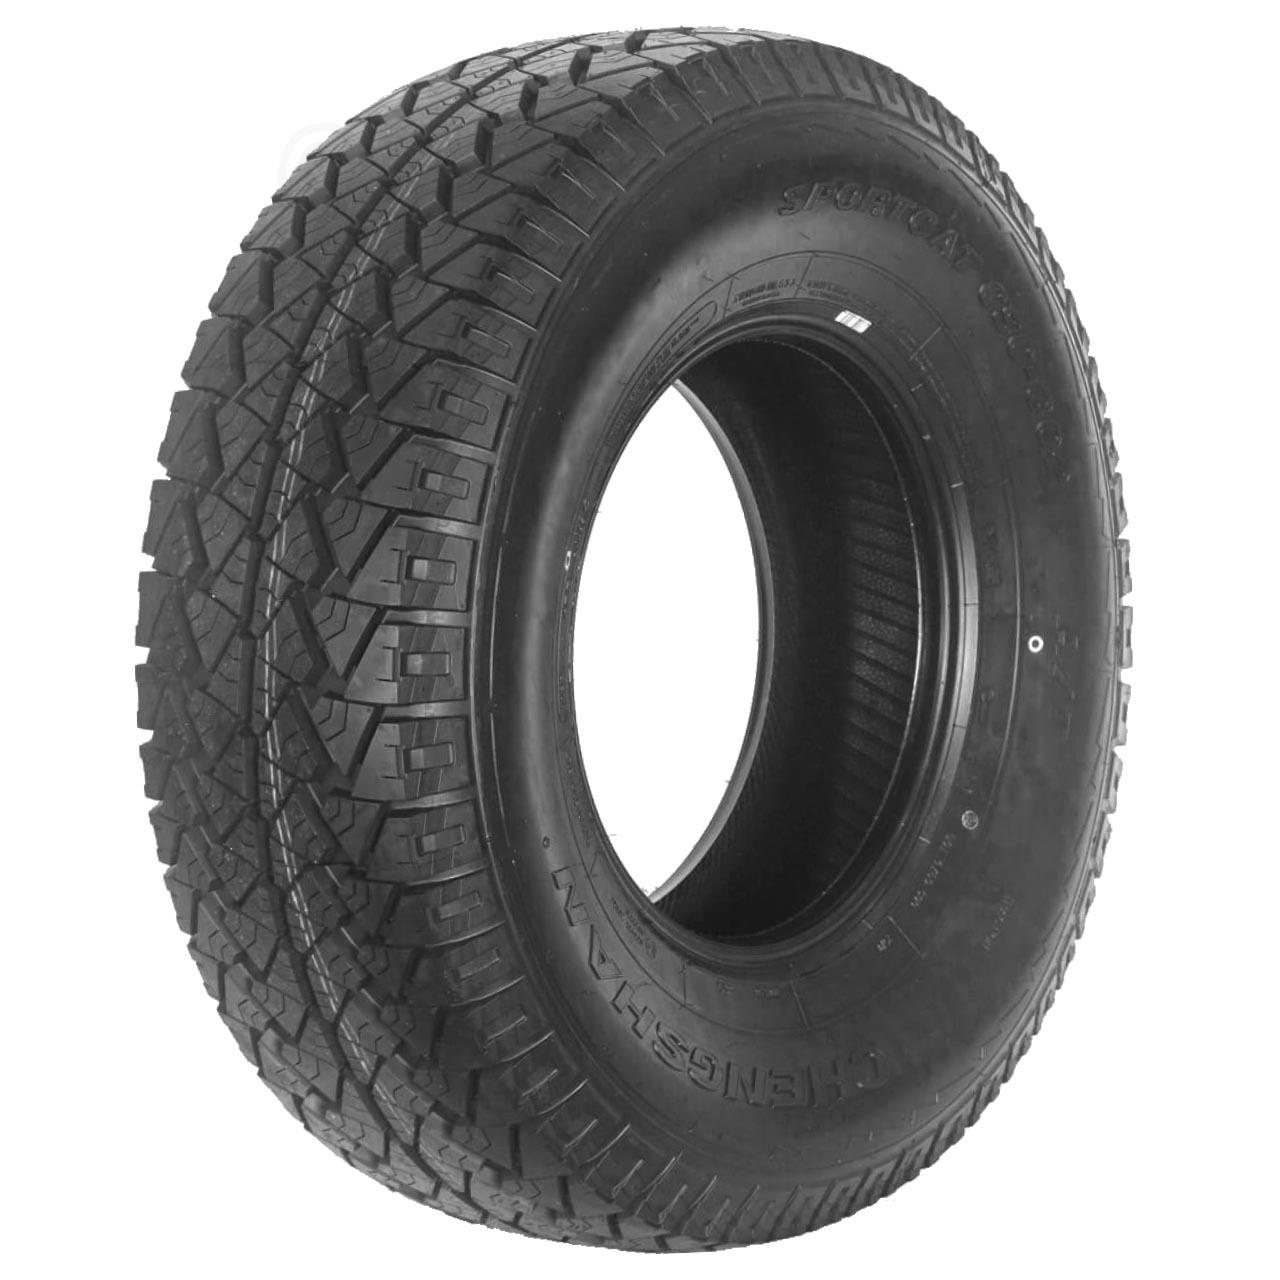 CHENGSHAN SPORTCAT CSC-302 245/75R16 111T BSW